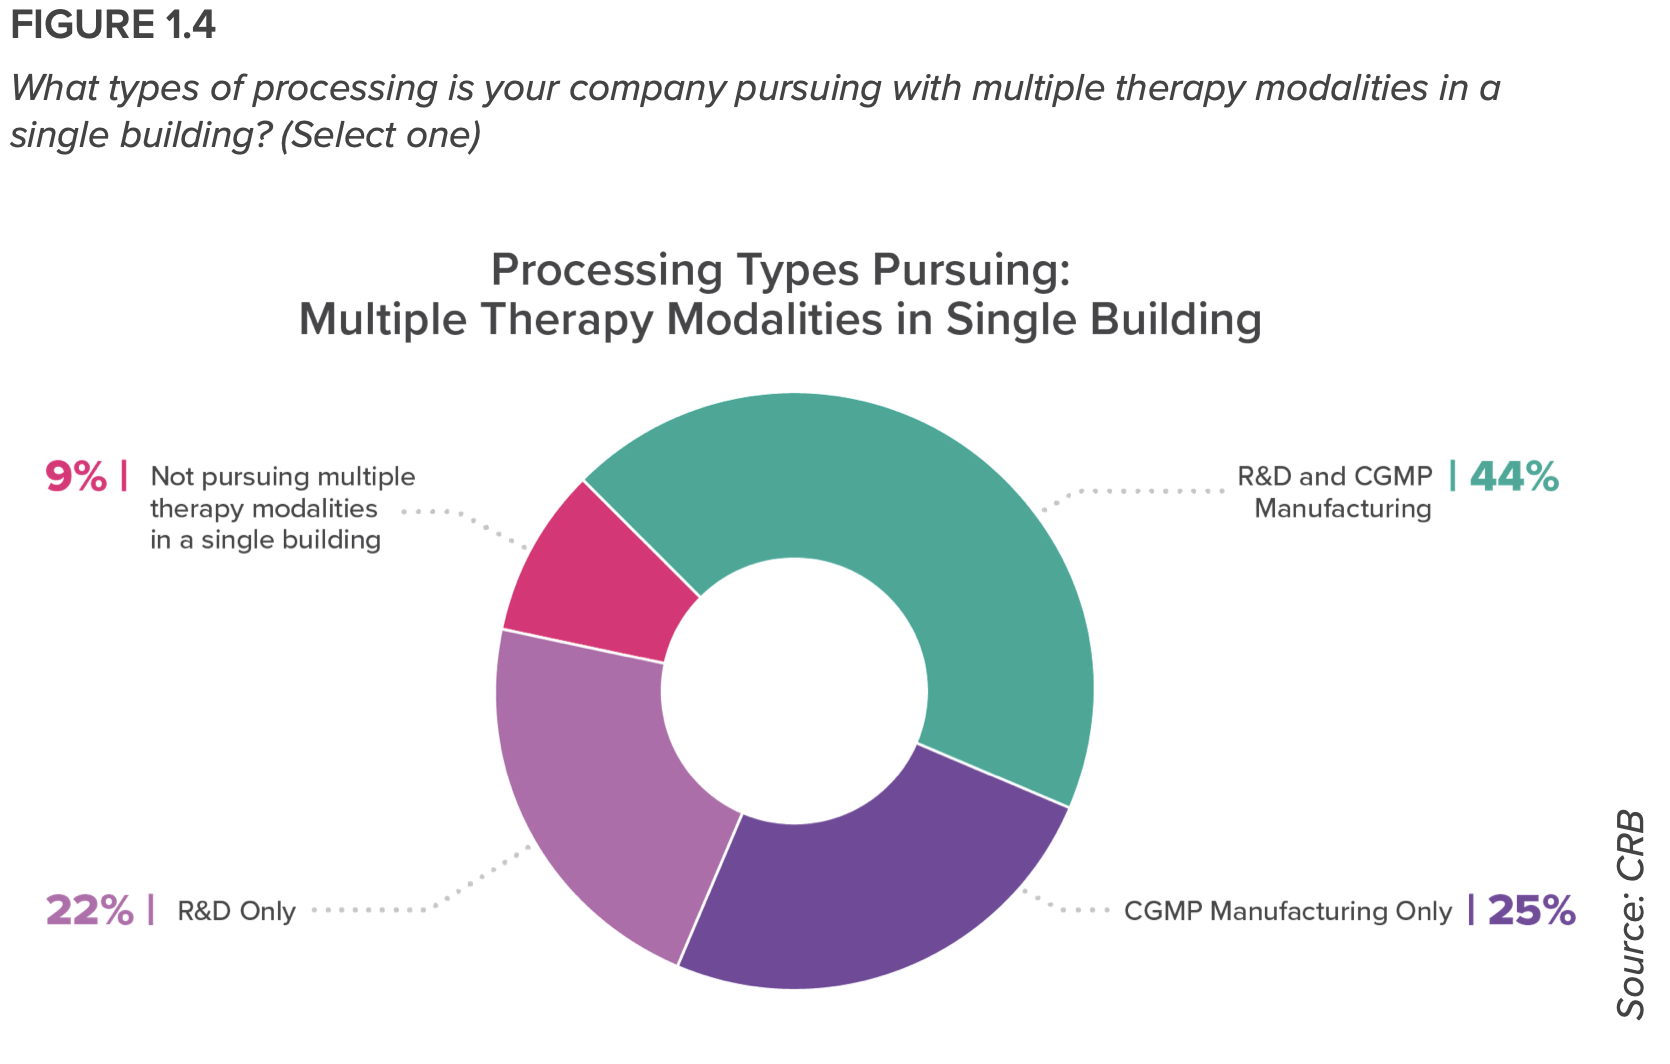 Multiple therapies in single buildings